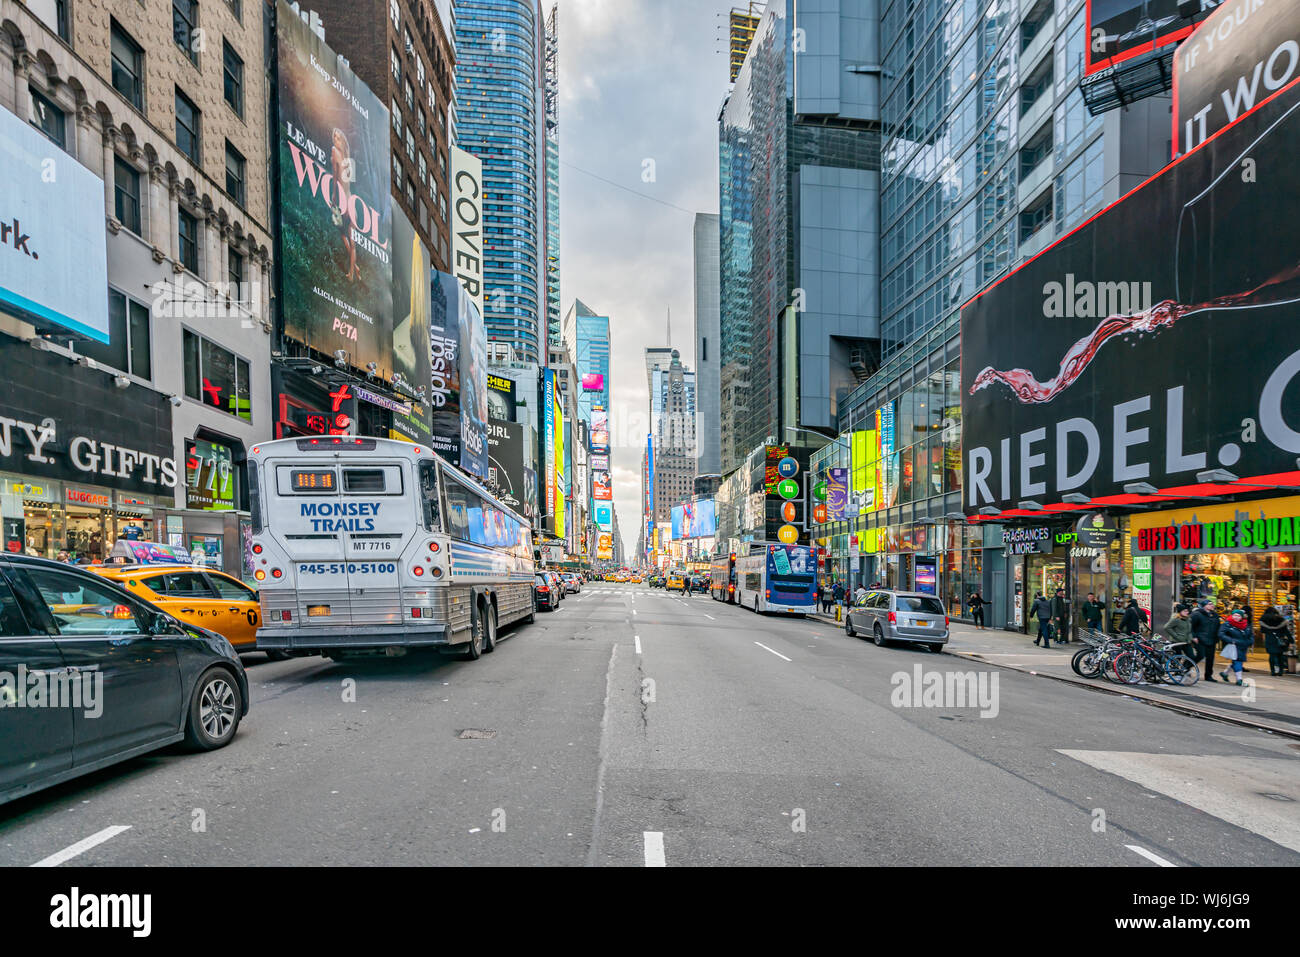 New York, NY, USA - December, 2018 - Streets of Manhattan, Seventh Avenue, Times Square, NYC. Stock Photo